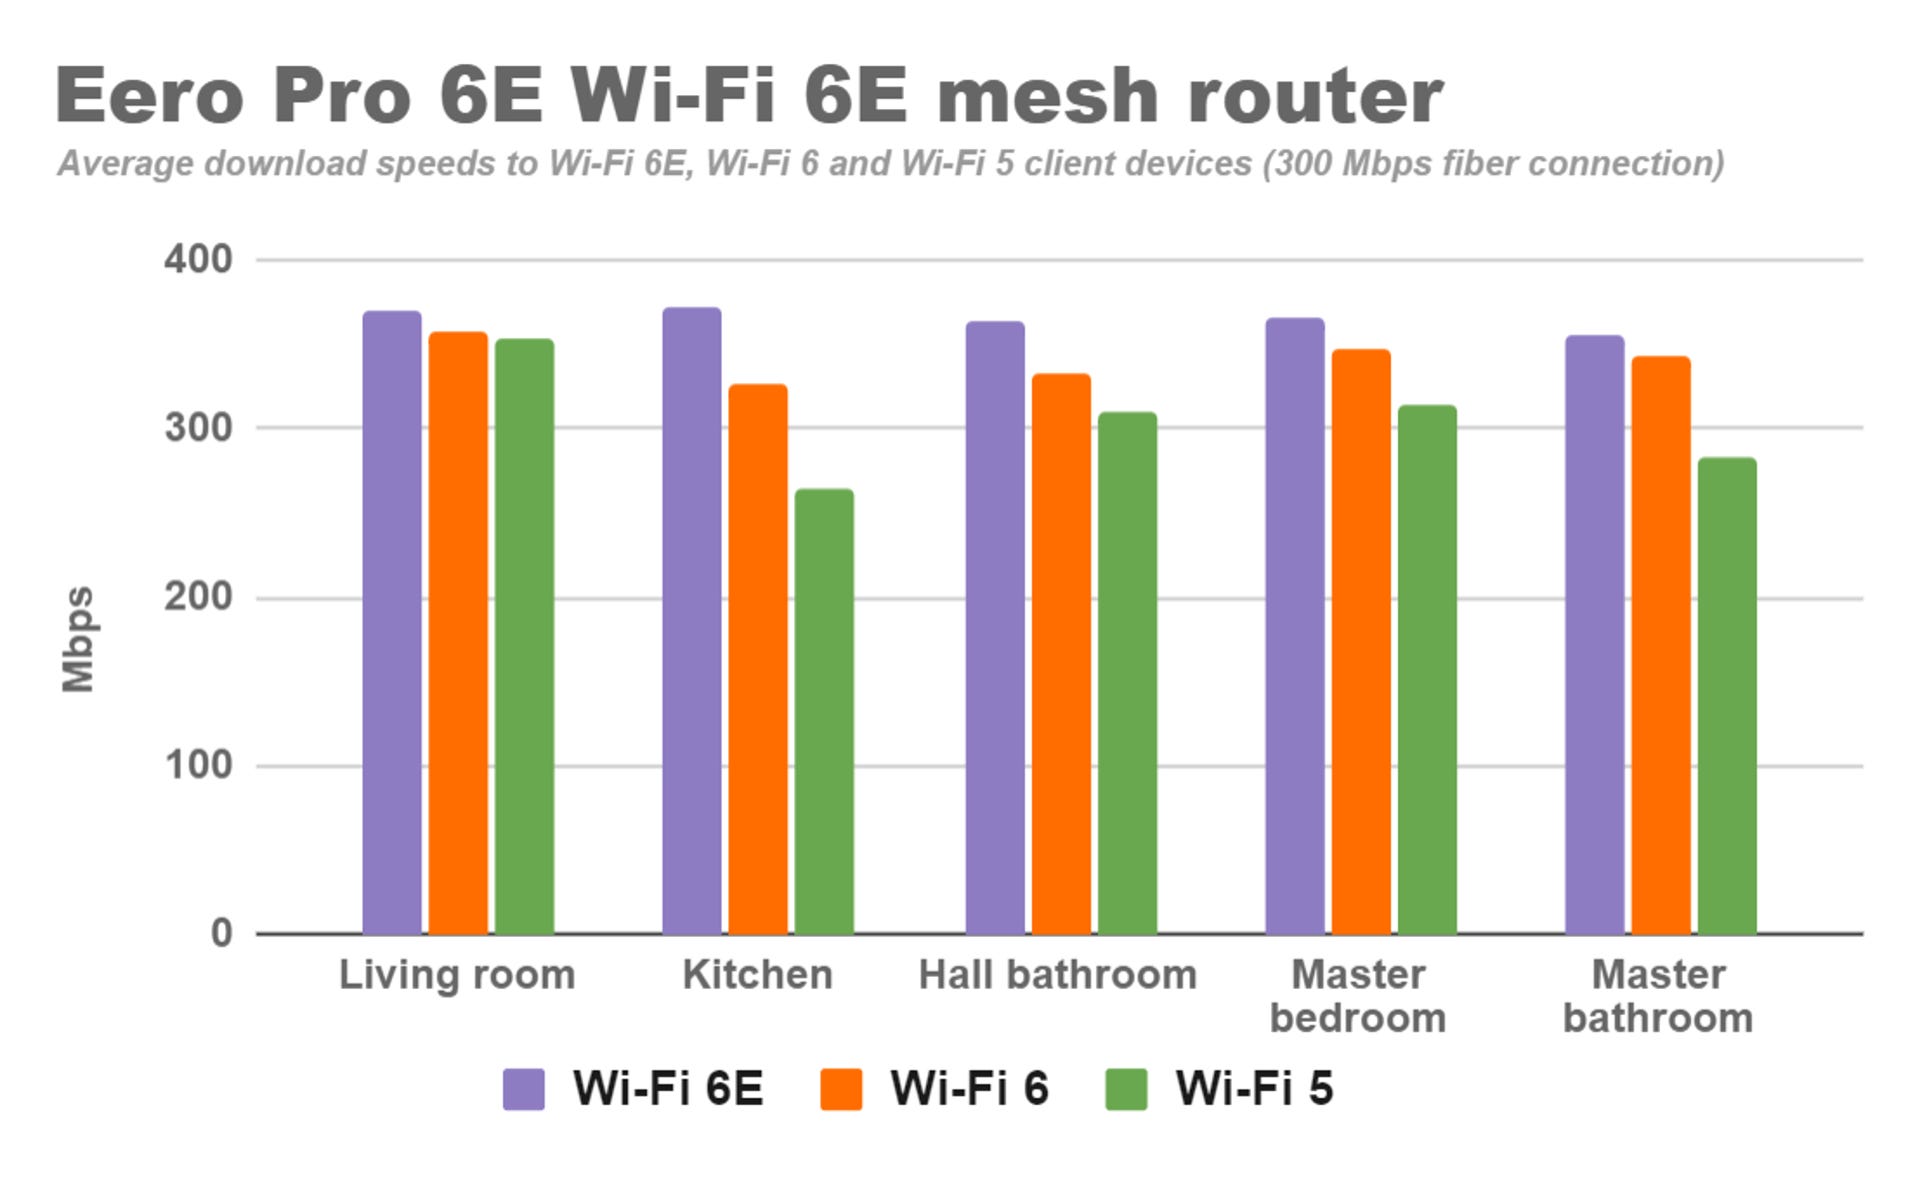 eero-pro-6e-wi-fi-6e-mesh-router-at-home-download-speeds.png